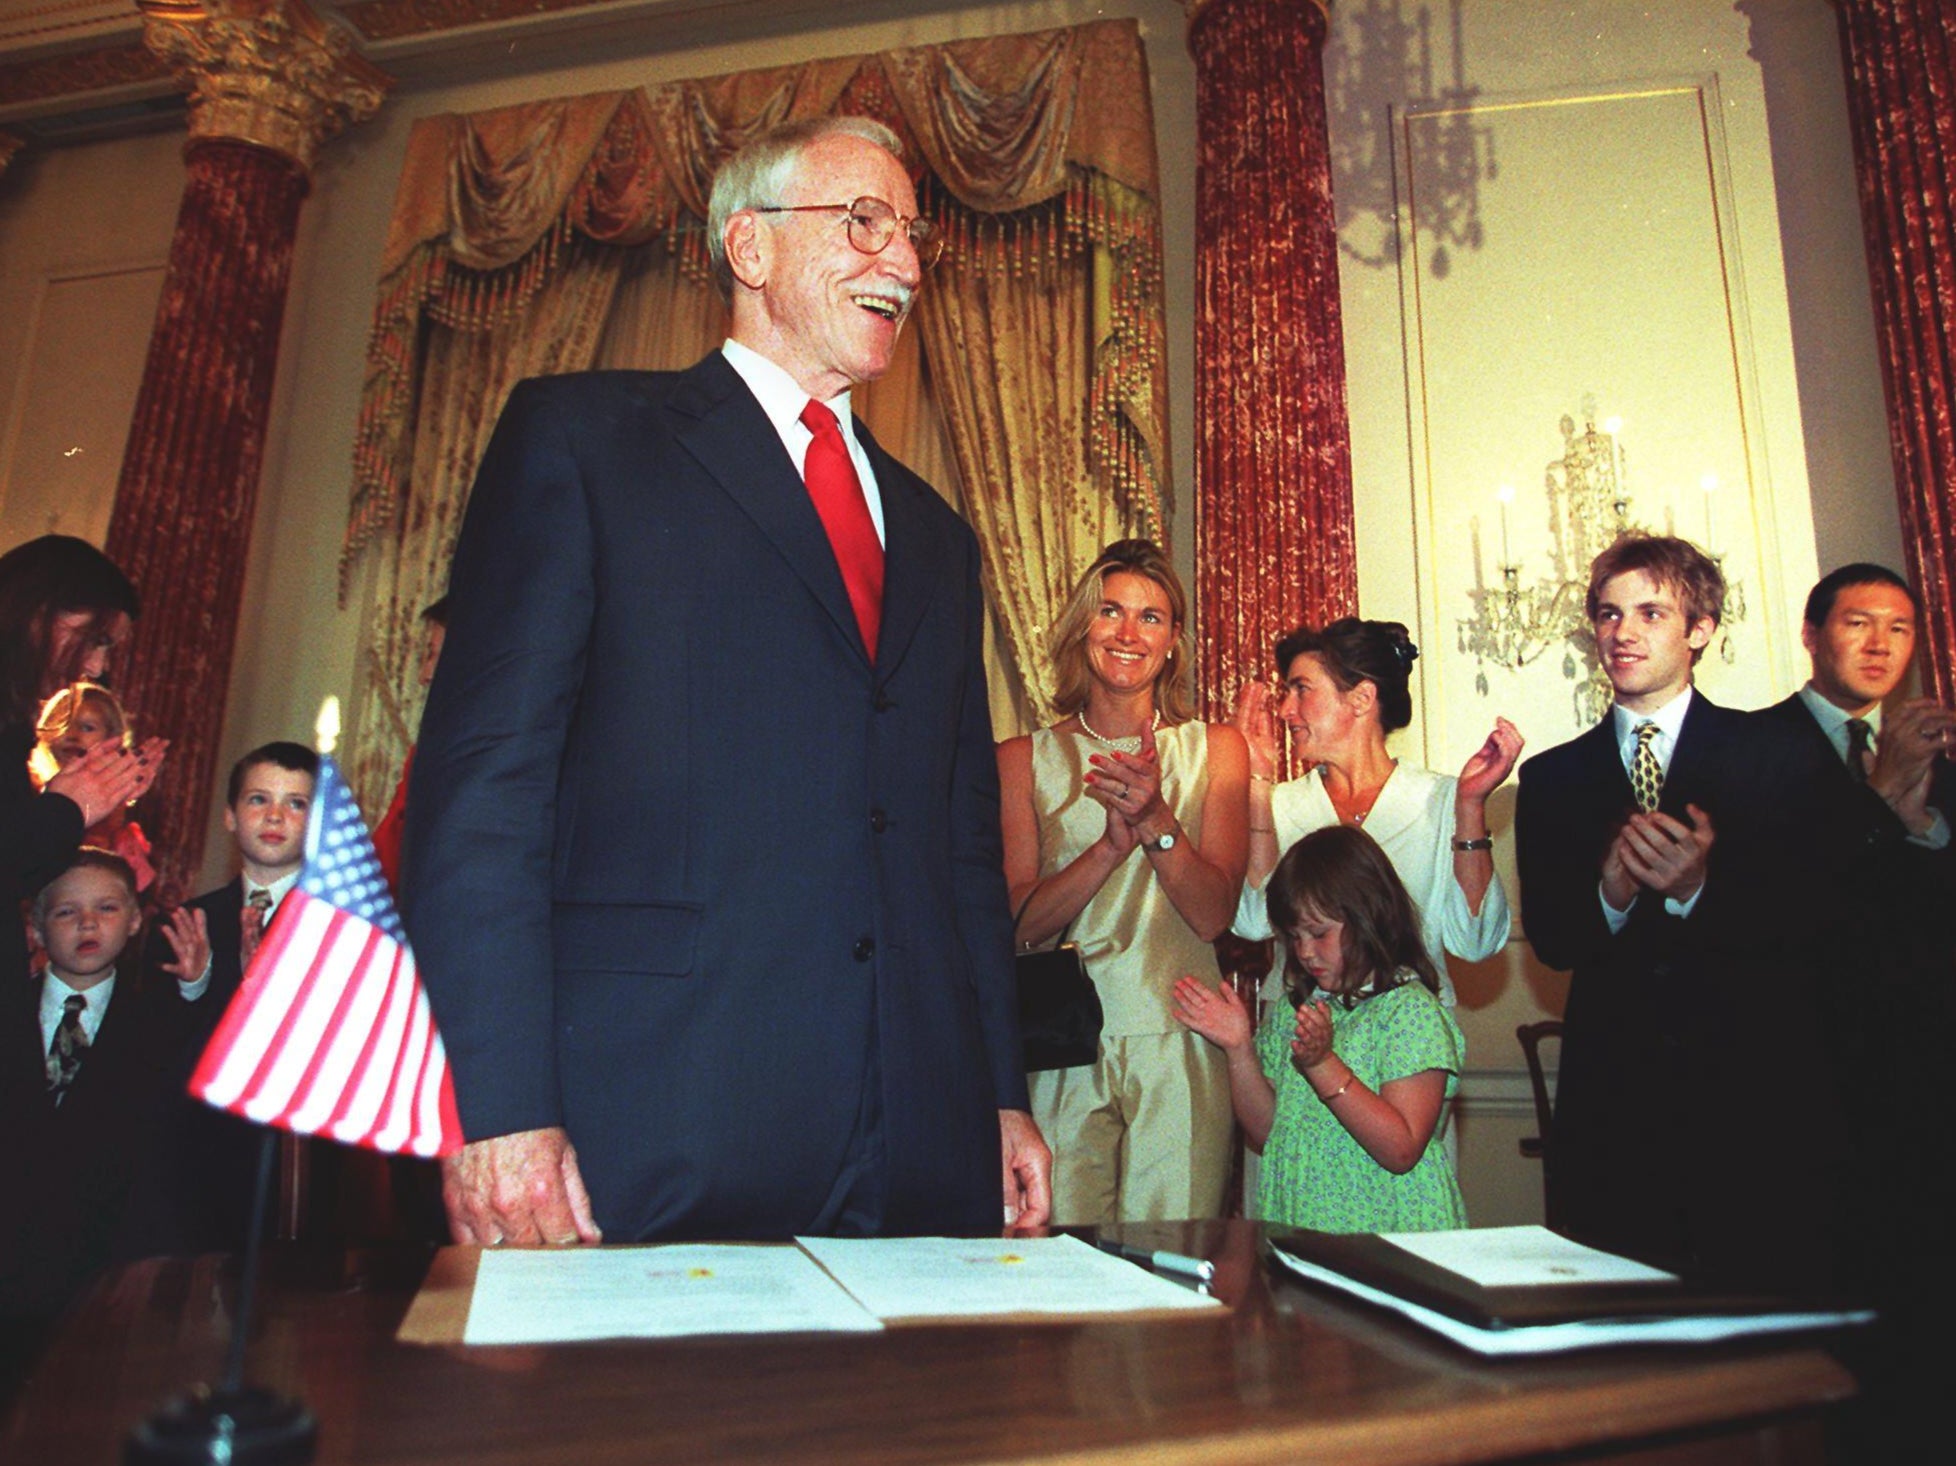 Family and friends applaud James Hormel after he is sworn in as US ambassador to Luxembourg at the State Department in Washington in 1999